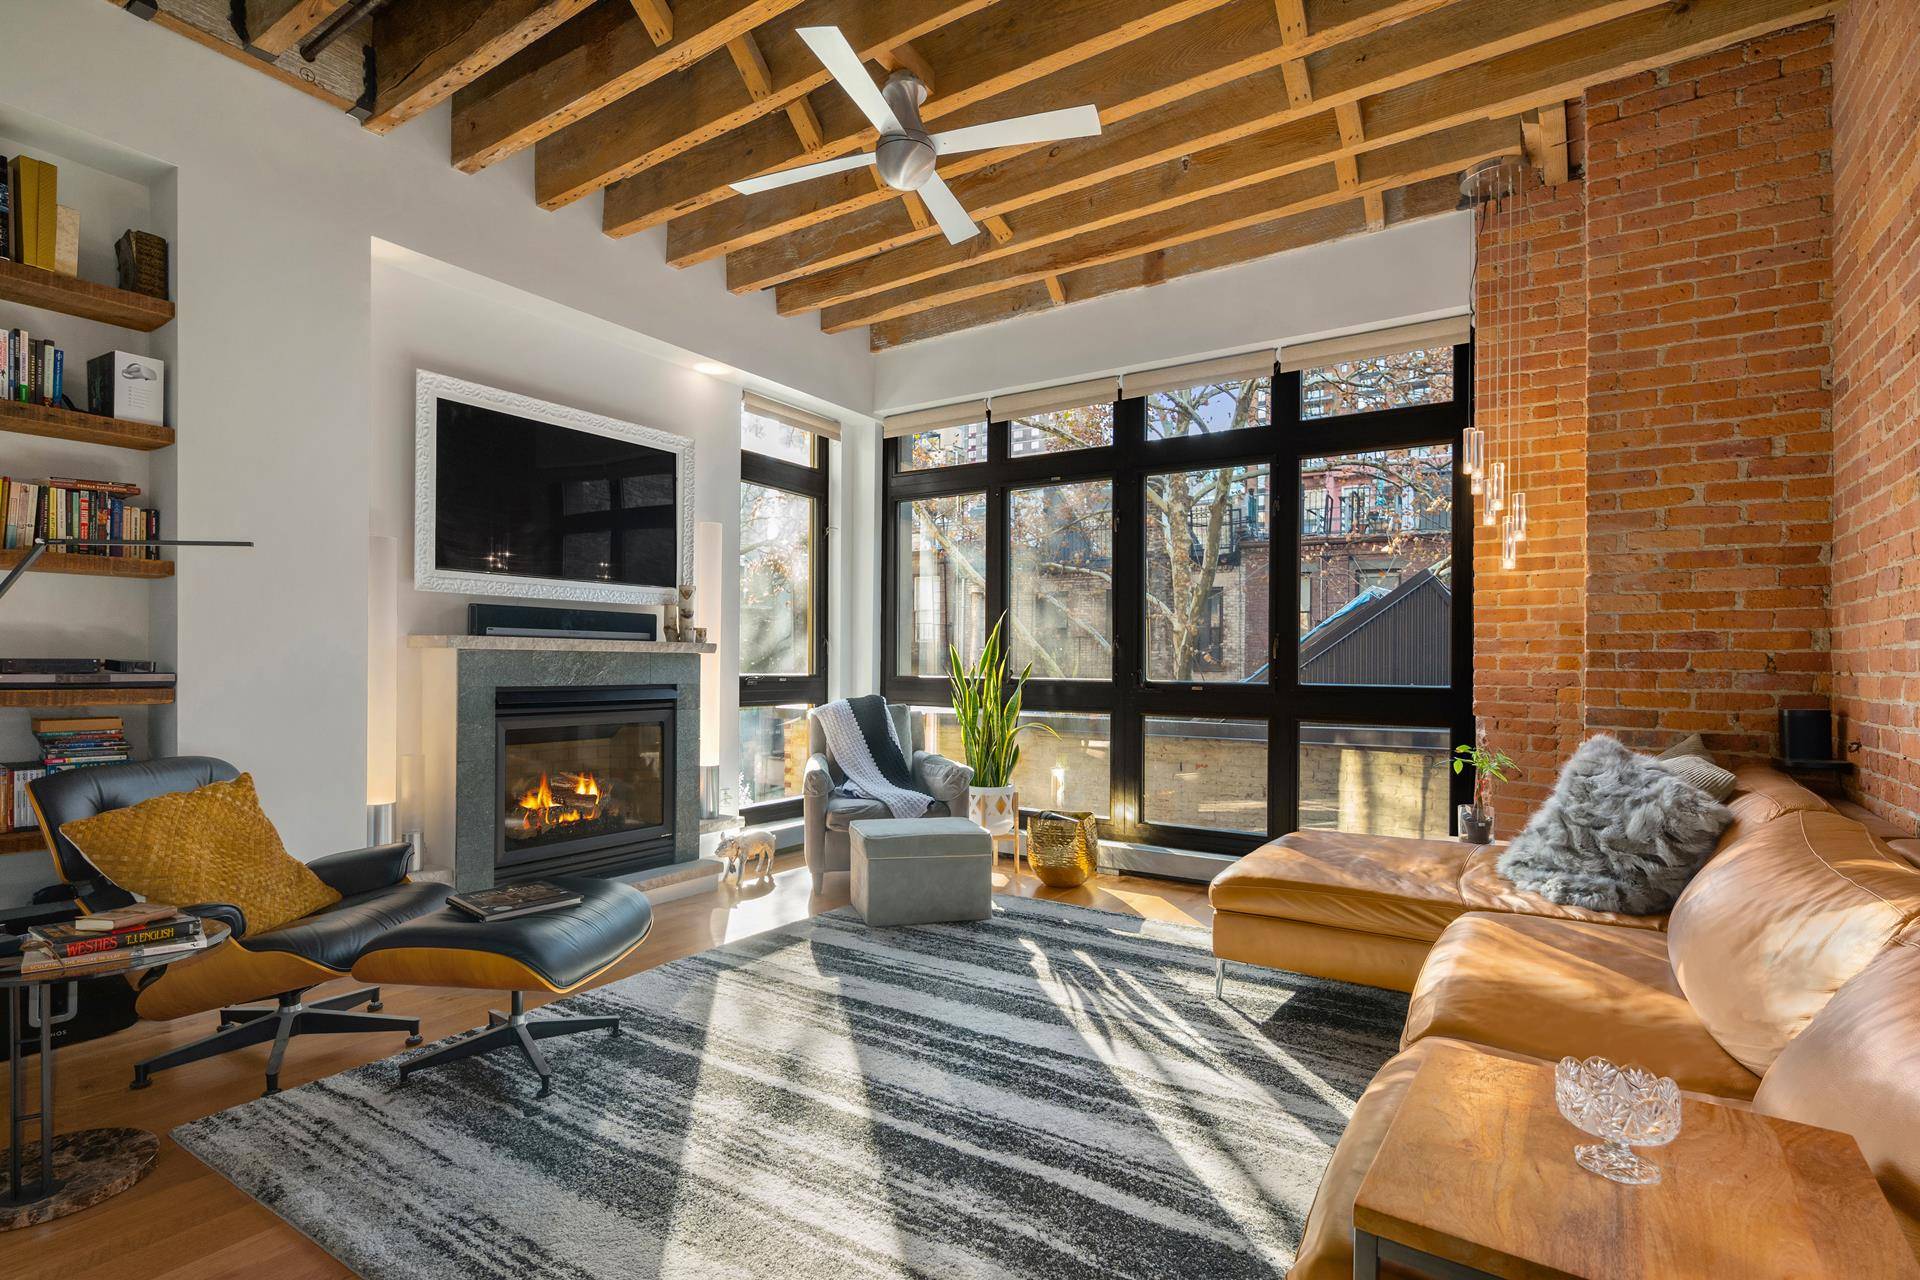 This classic 2 bedroom 2 bathroom loft condominium mixes the best of prewar architecture with all the conveniences of modern luxury and technology.